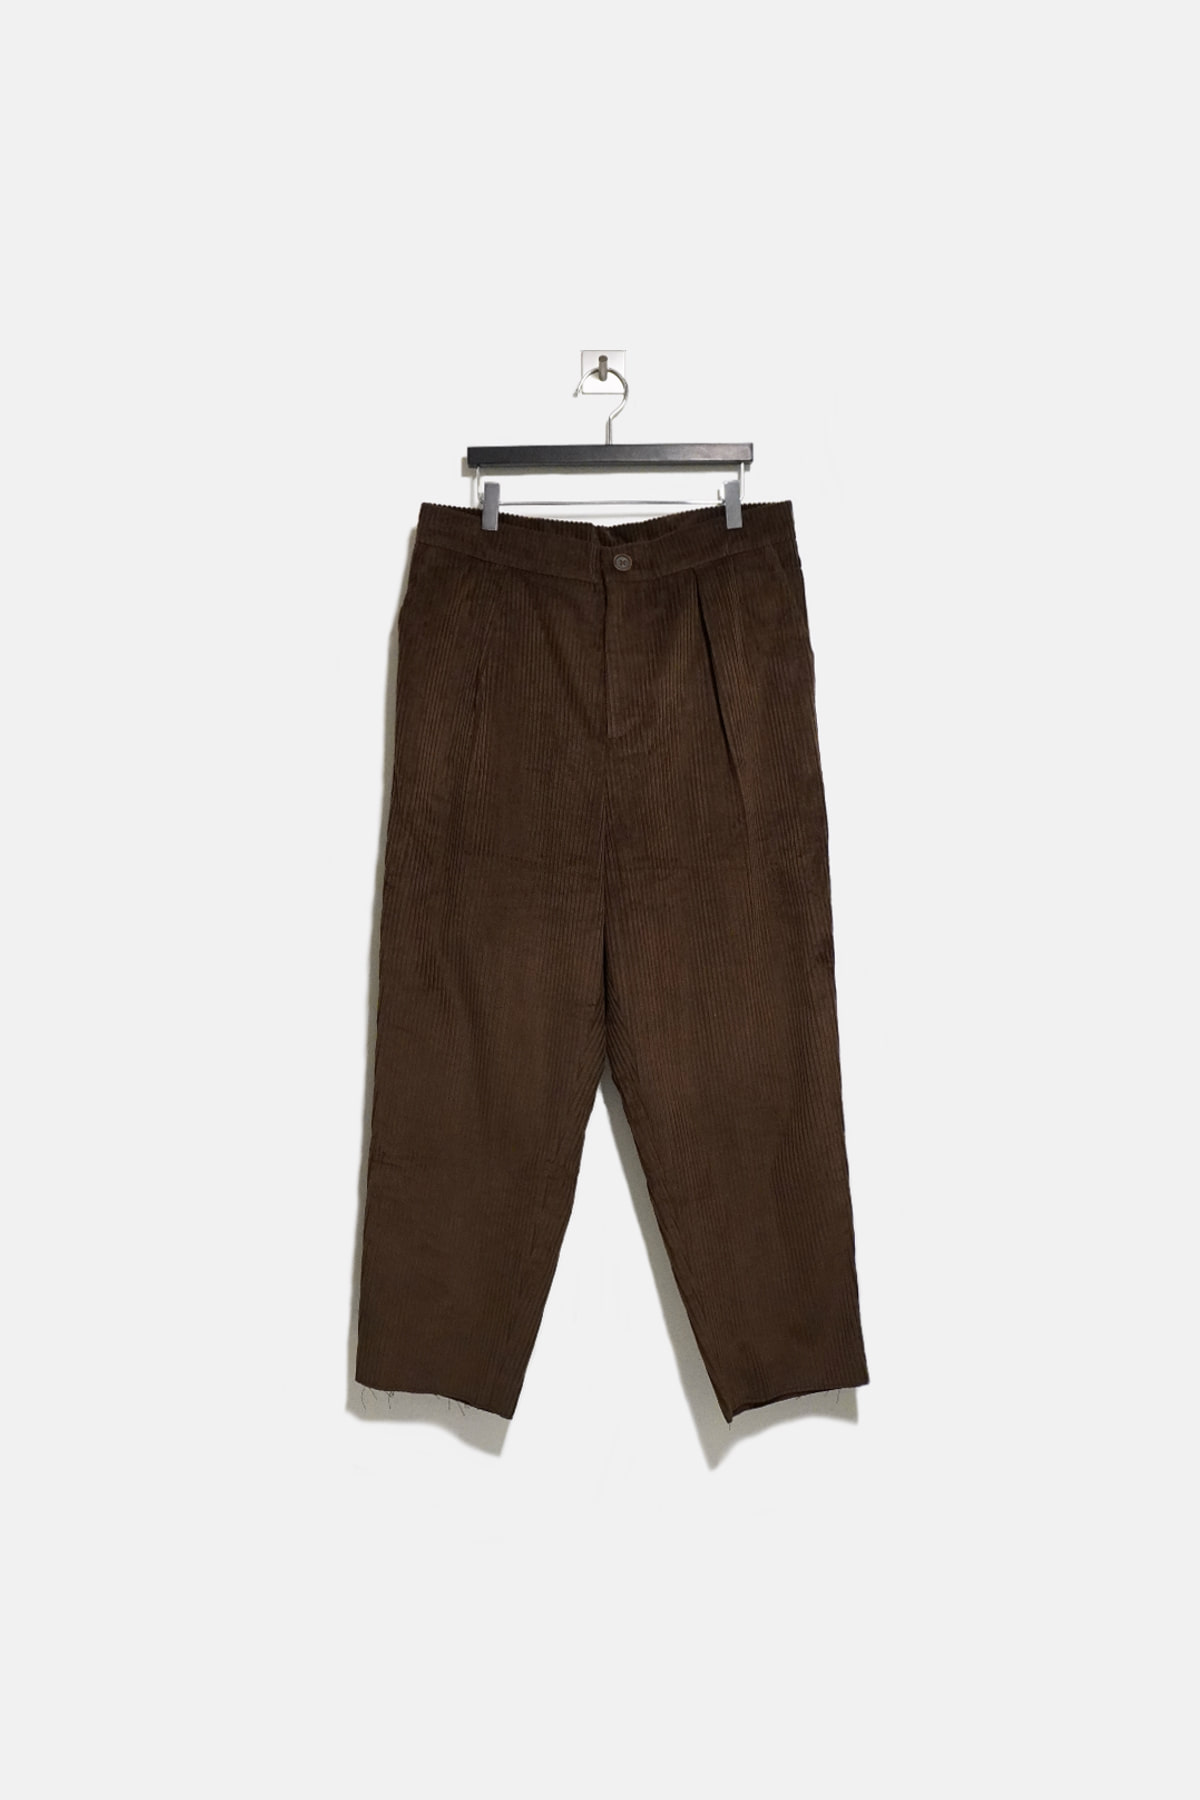 [An Irrational Element] Simple Trouser - Chocolate